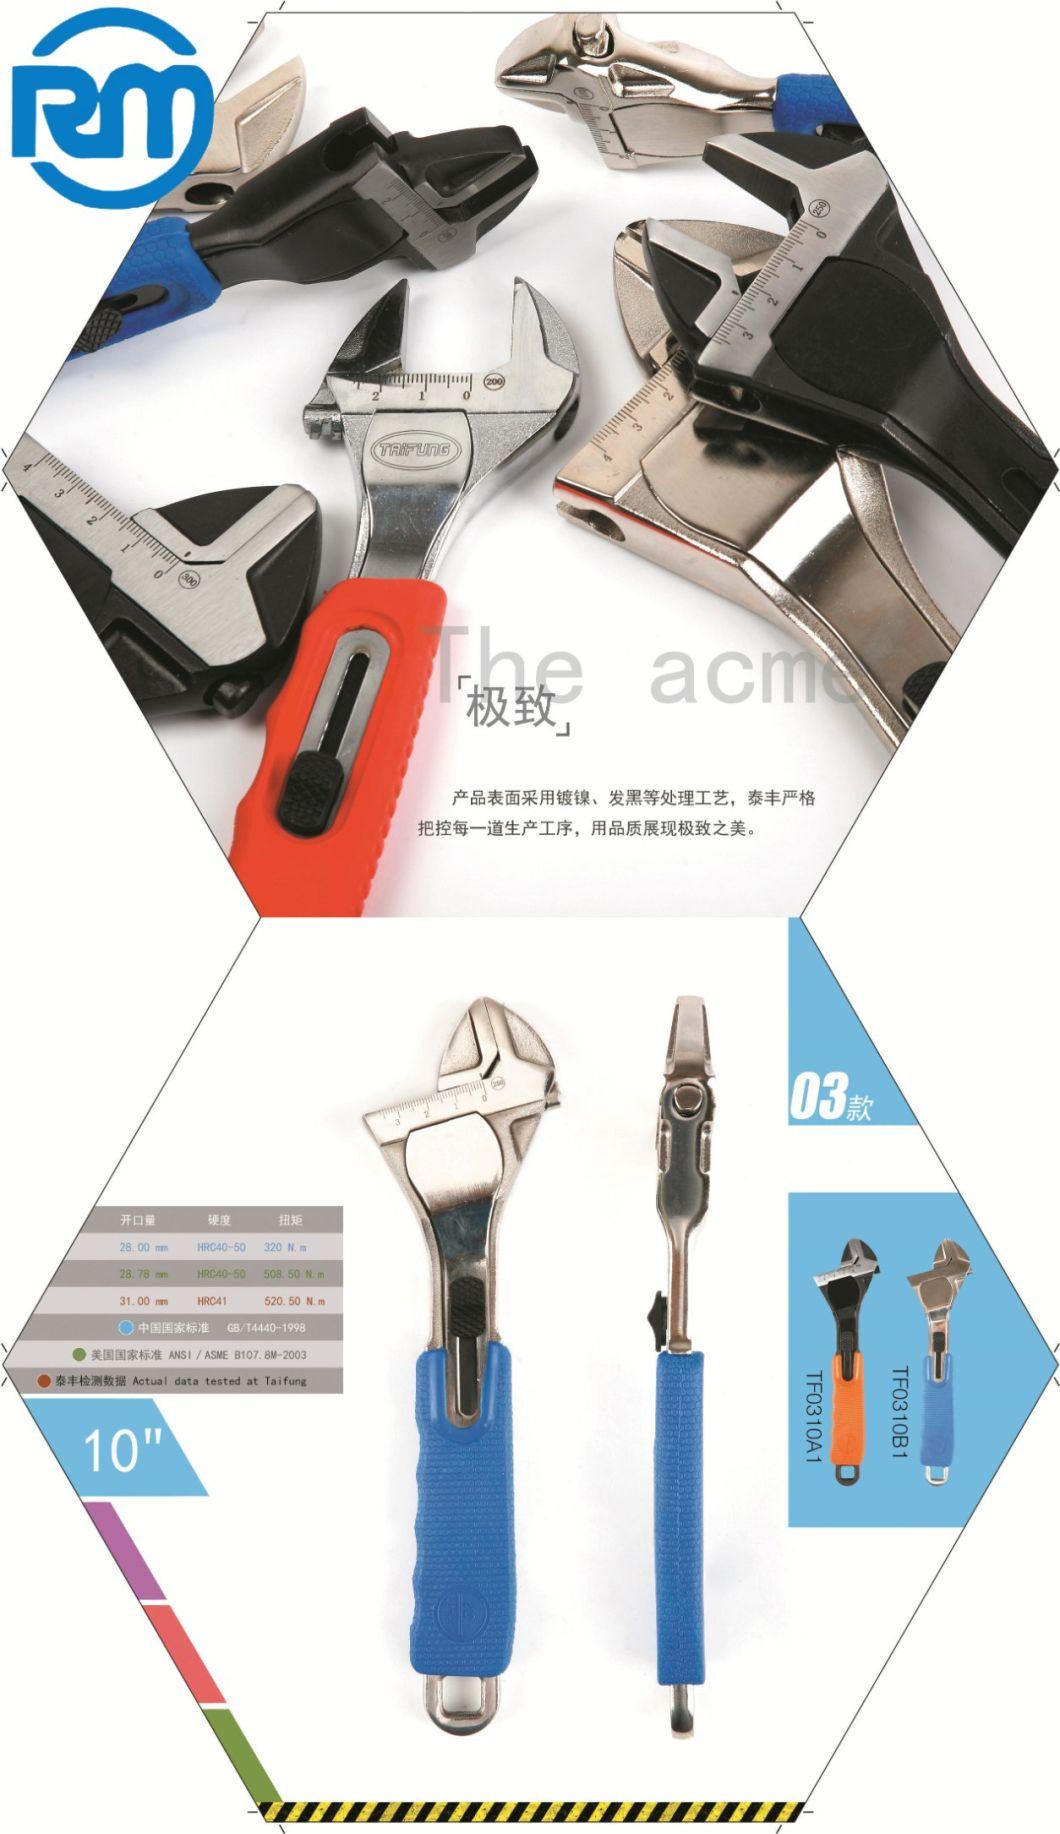 China Wholesale Alloy Steel Hex Allen Key Wrench Professional Quality Comfortable Strength Material Trr